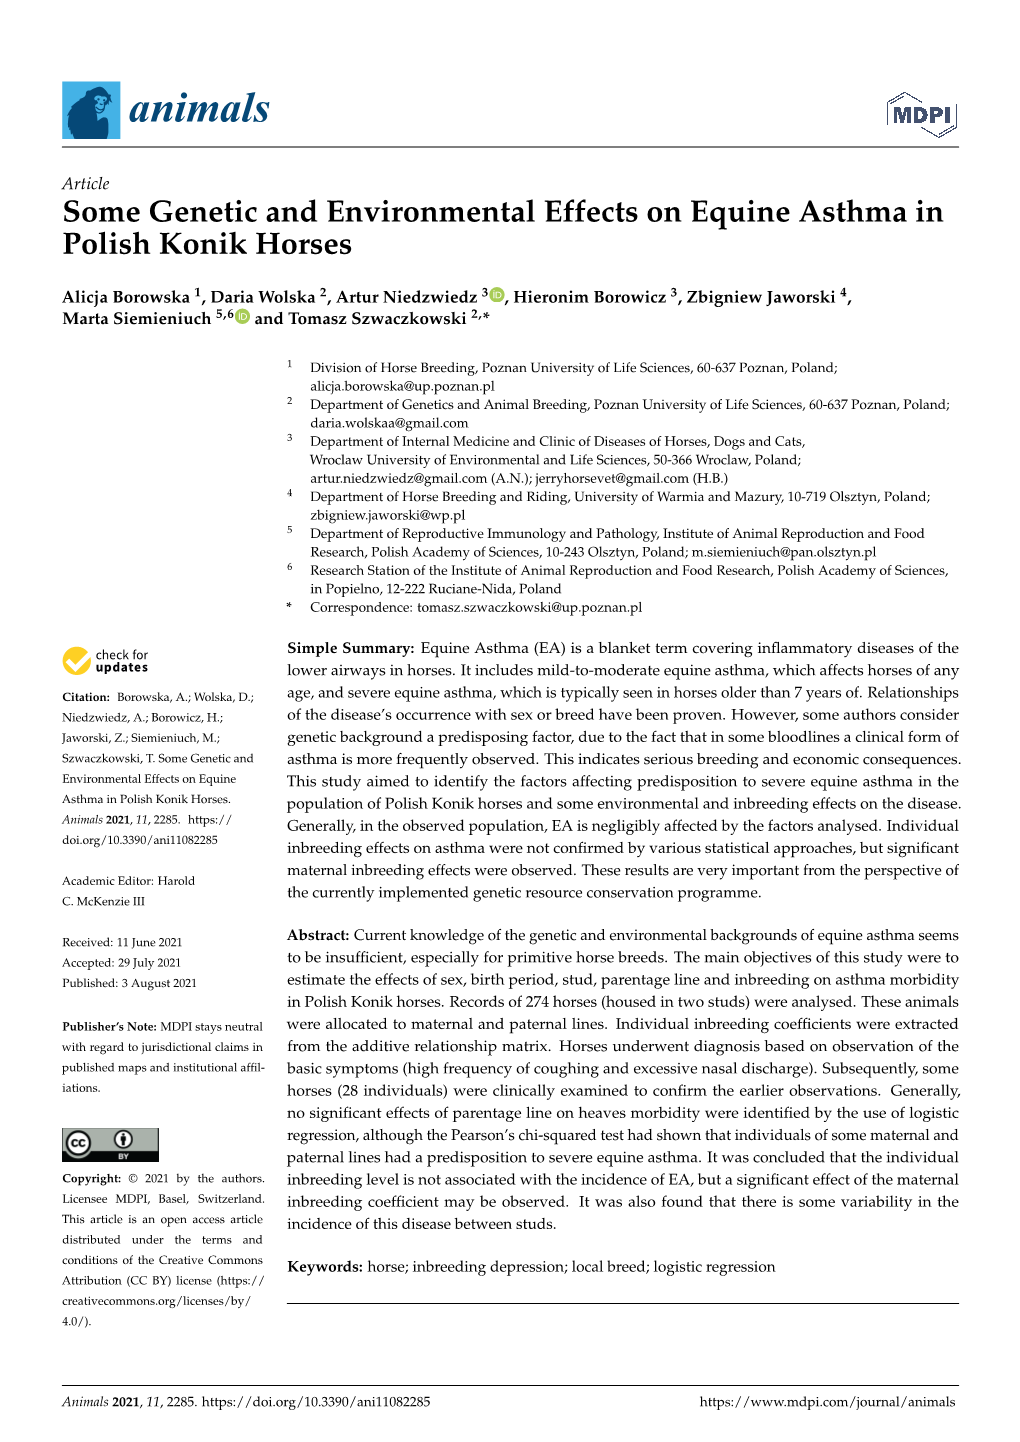 Some Genetic and Environmental Effects on Equine Asthma in Polish Konik Horses